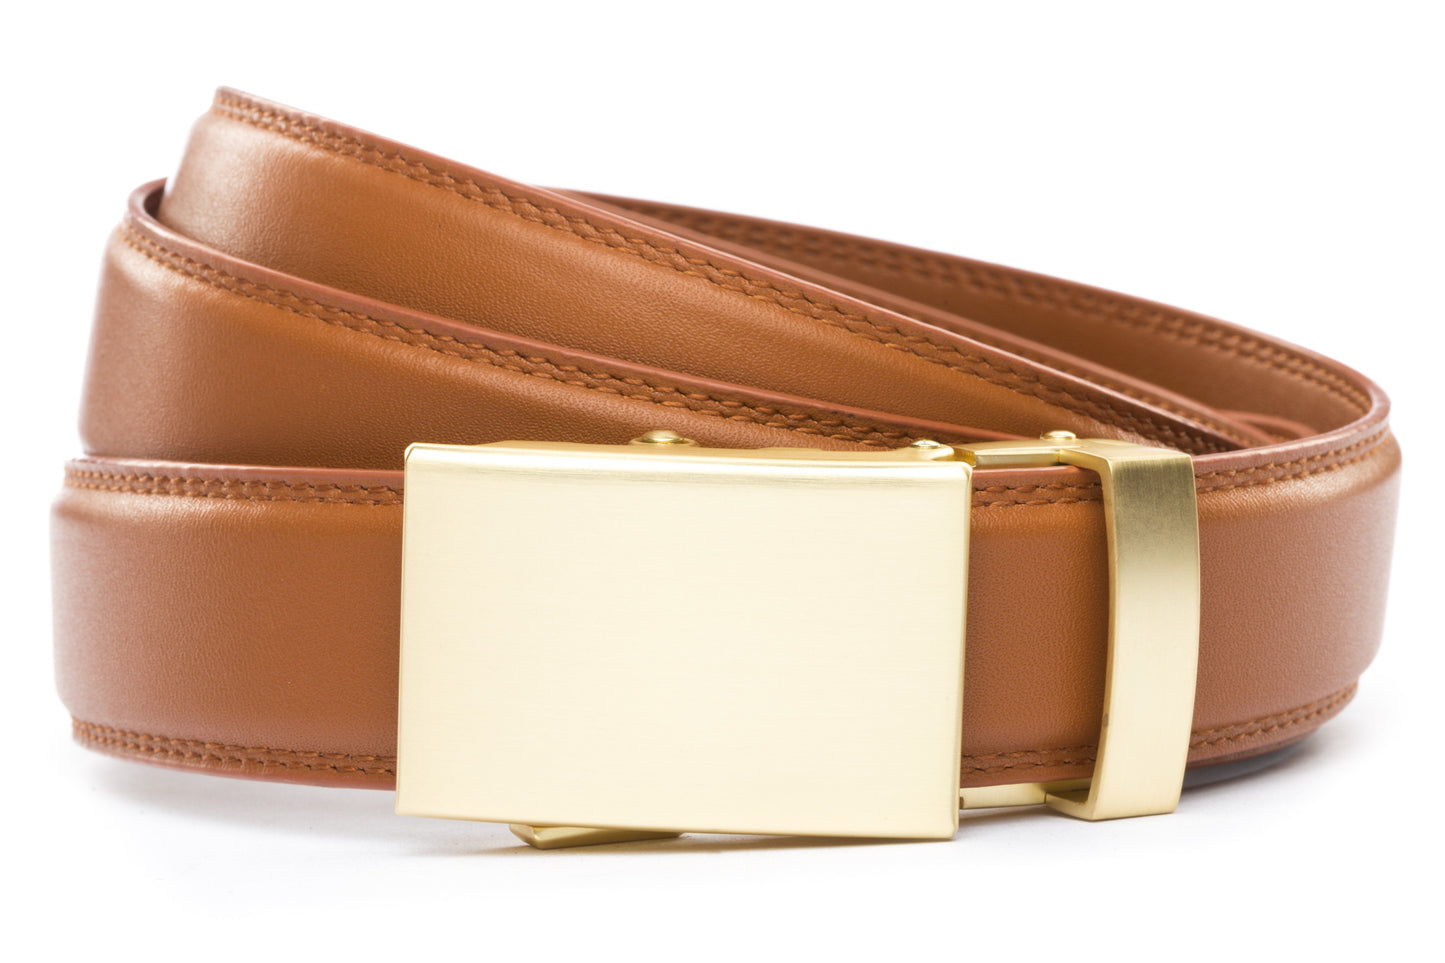 Saddle Tan Formal Leather w/Classic in Matte Gold Buckle (1.25") - Anson Belt & Buckle